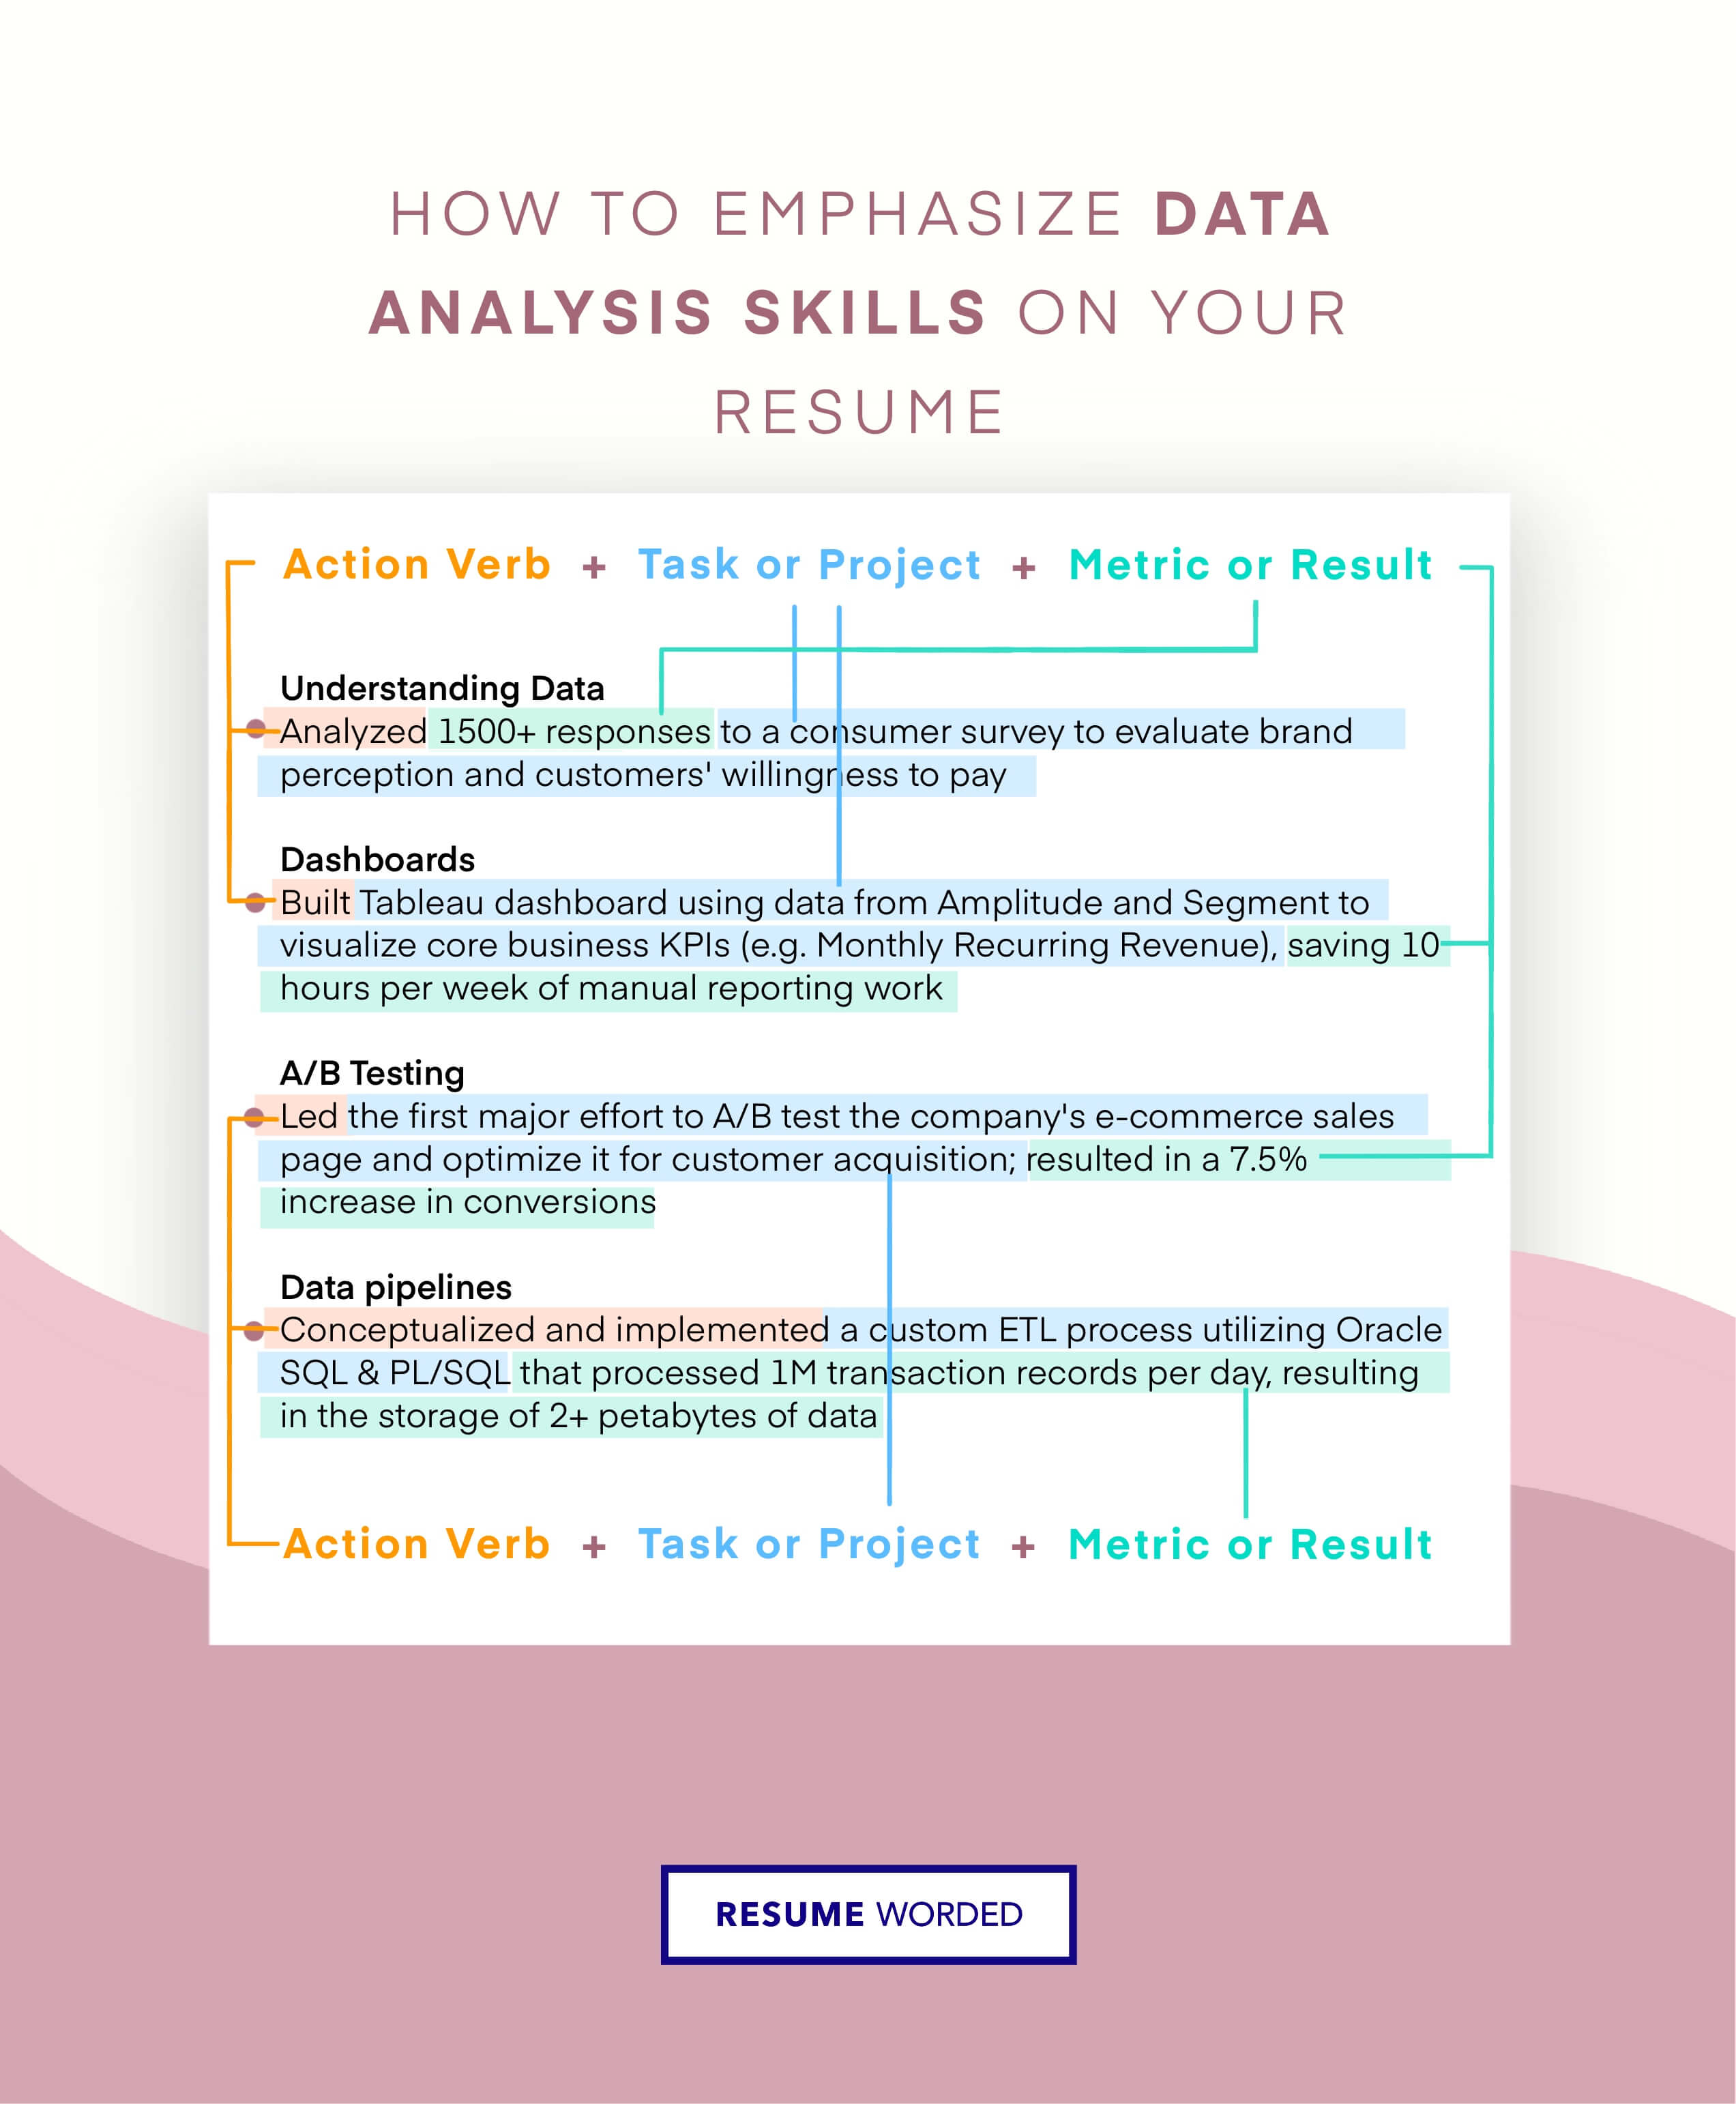 Demonstrate proficiencies with Data Analysis Tools - Growth Marketer CV